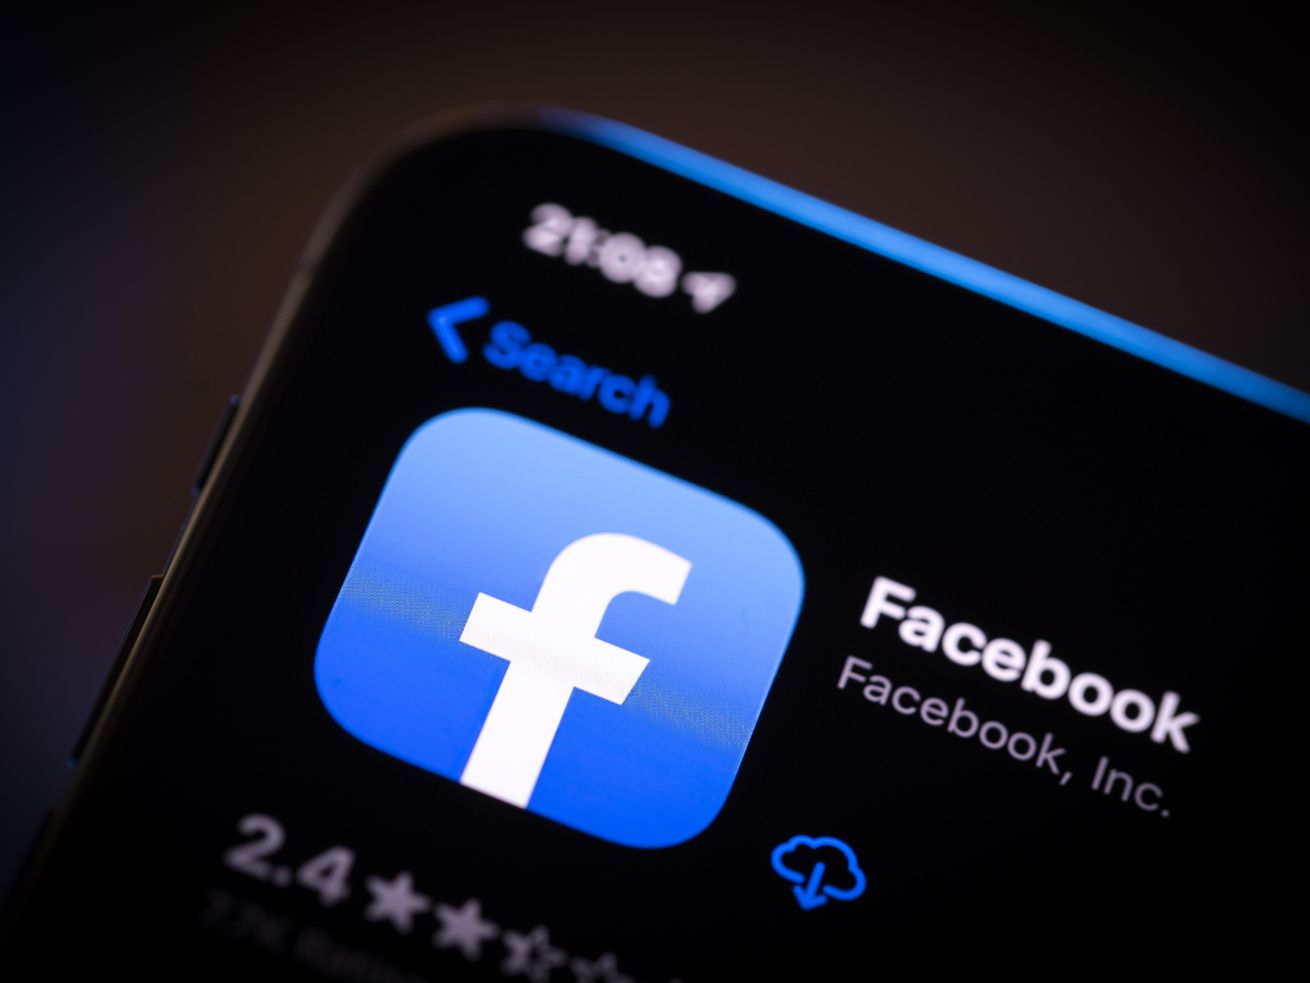 The Facebook app icon is displayed in the Apple App Store on a smartphone screen.